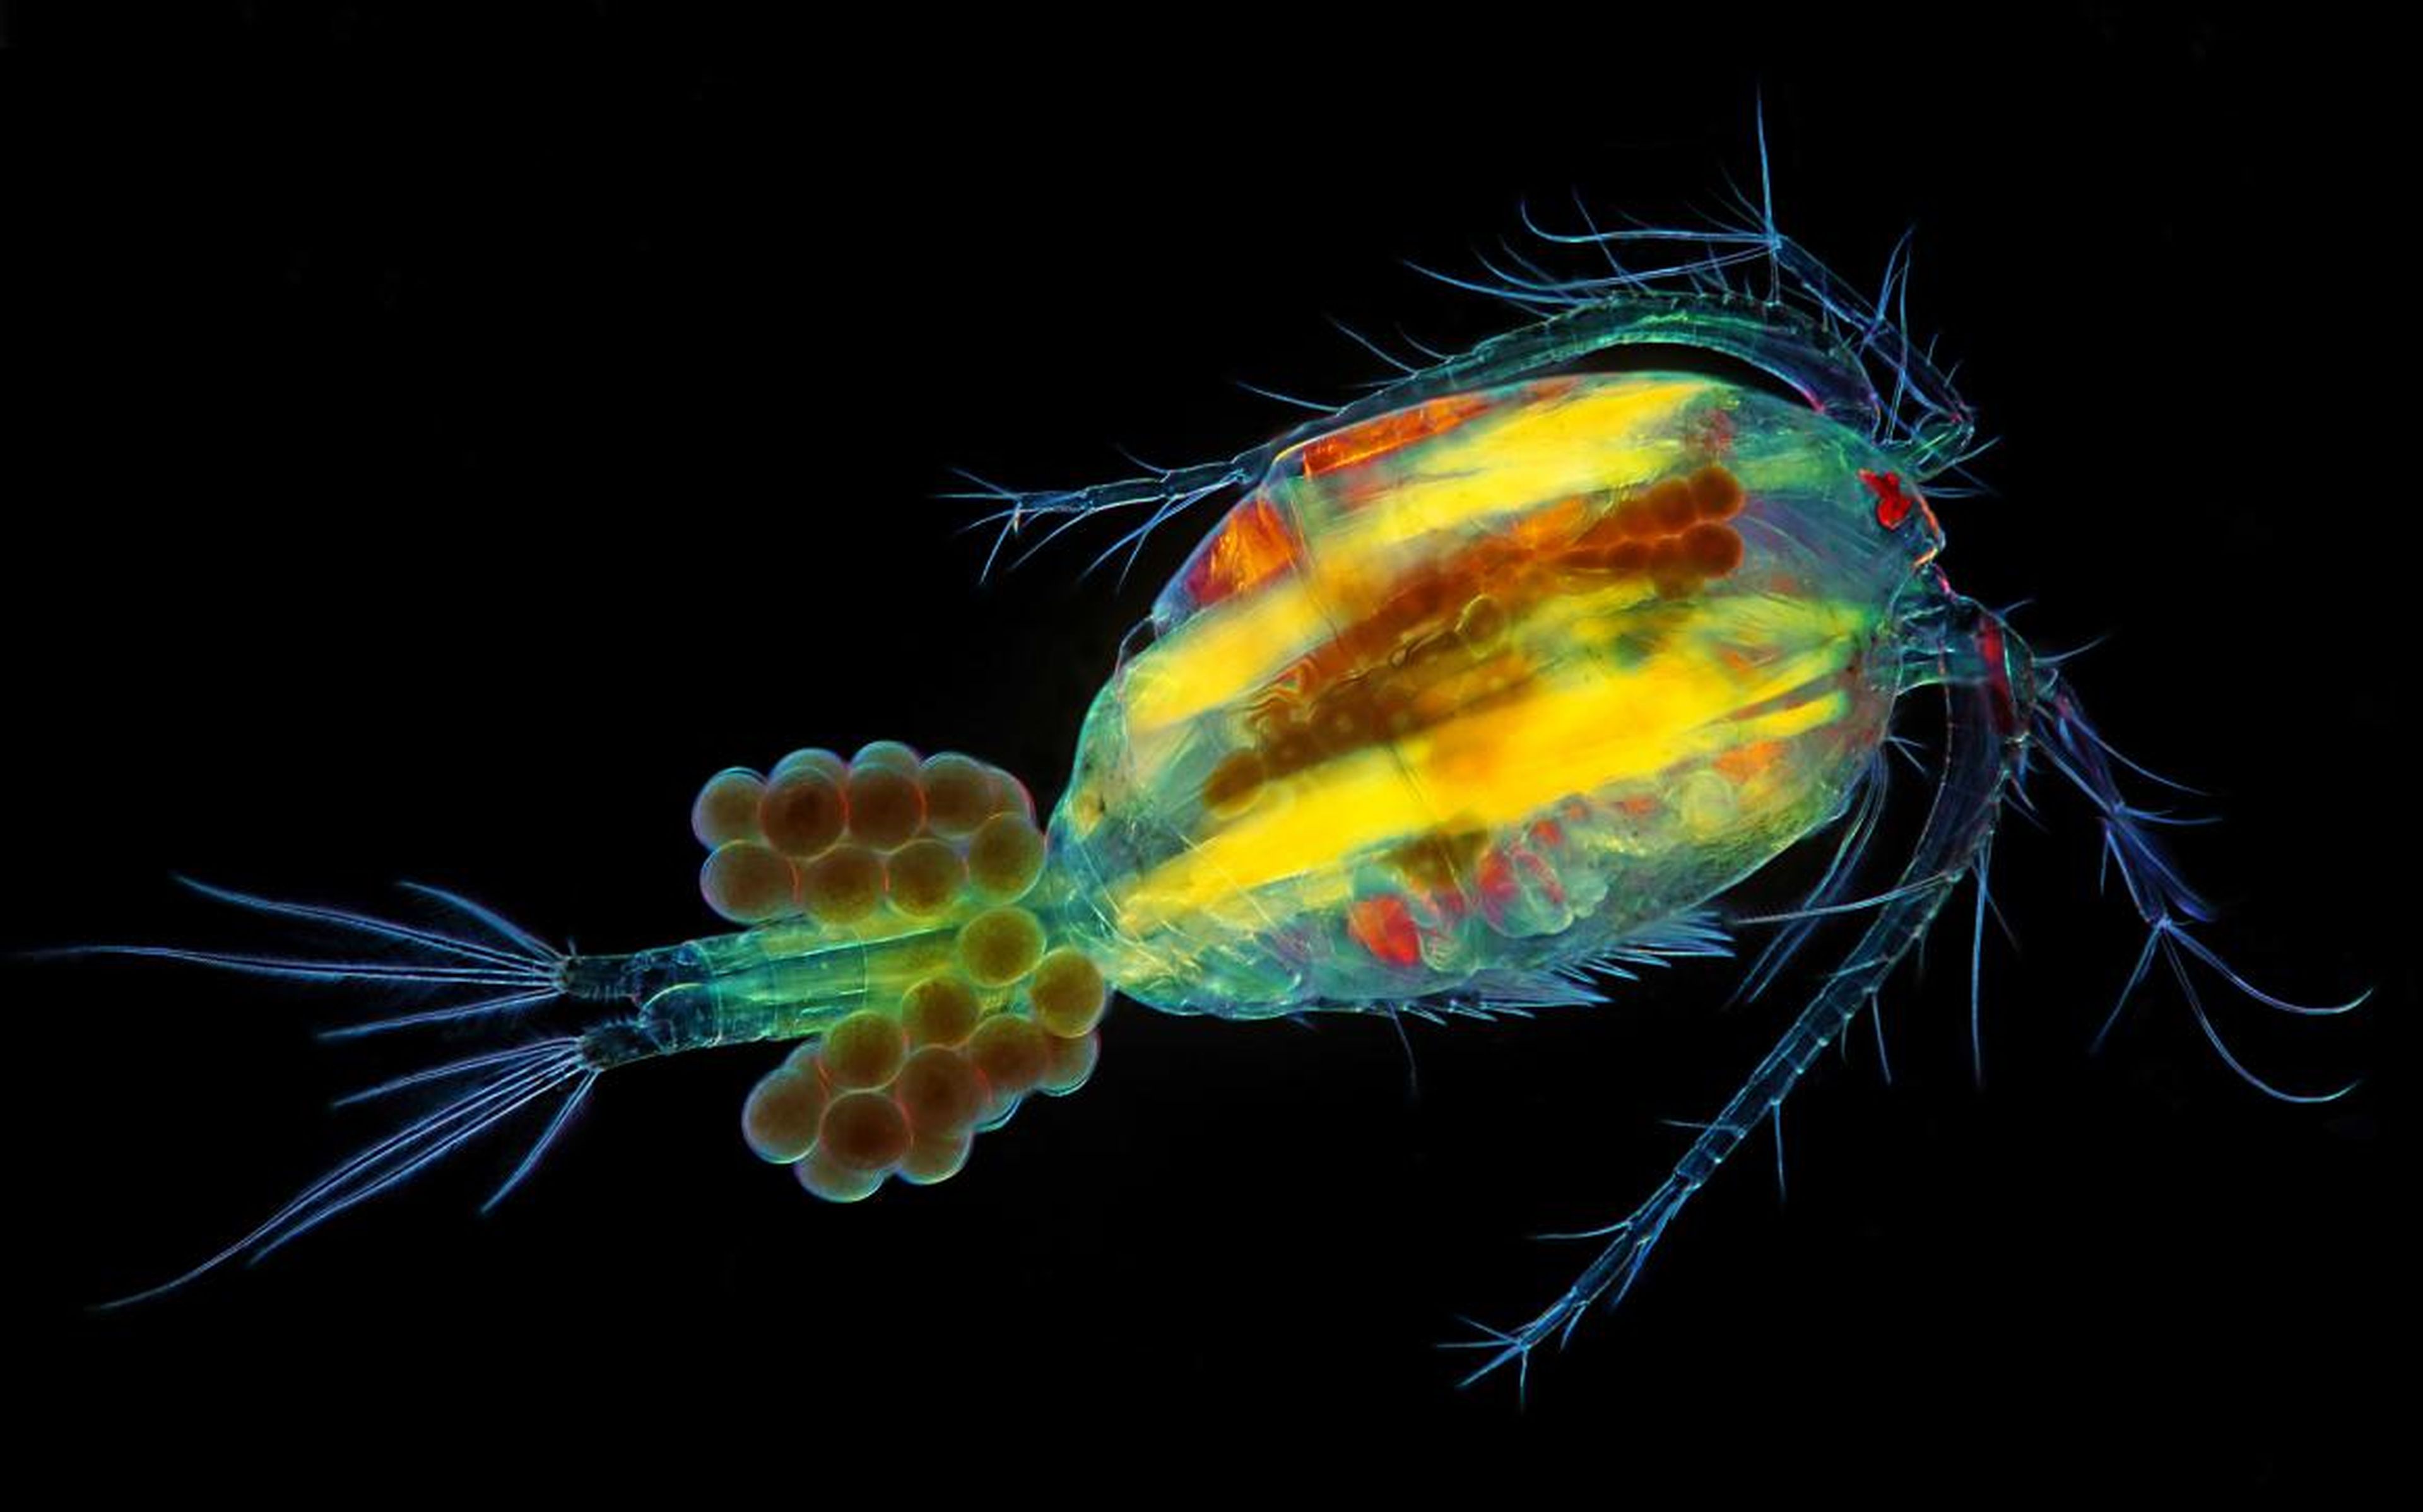 Cyclop, a one-eyed water flea, with eggs.